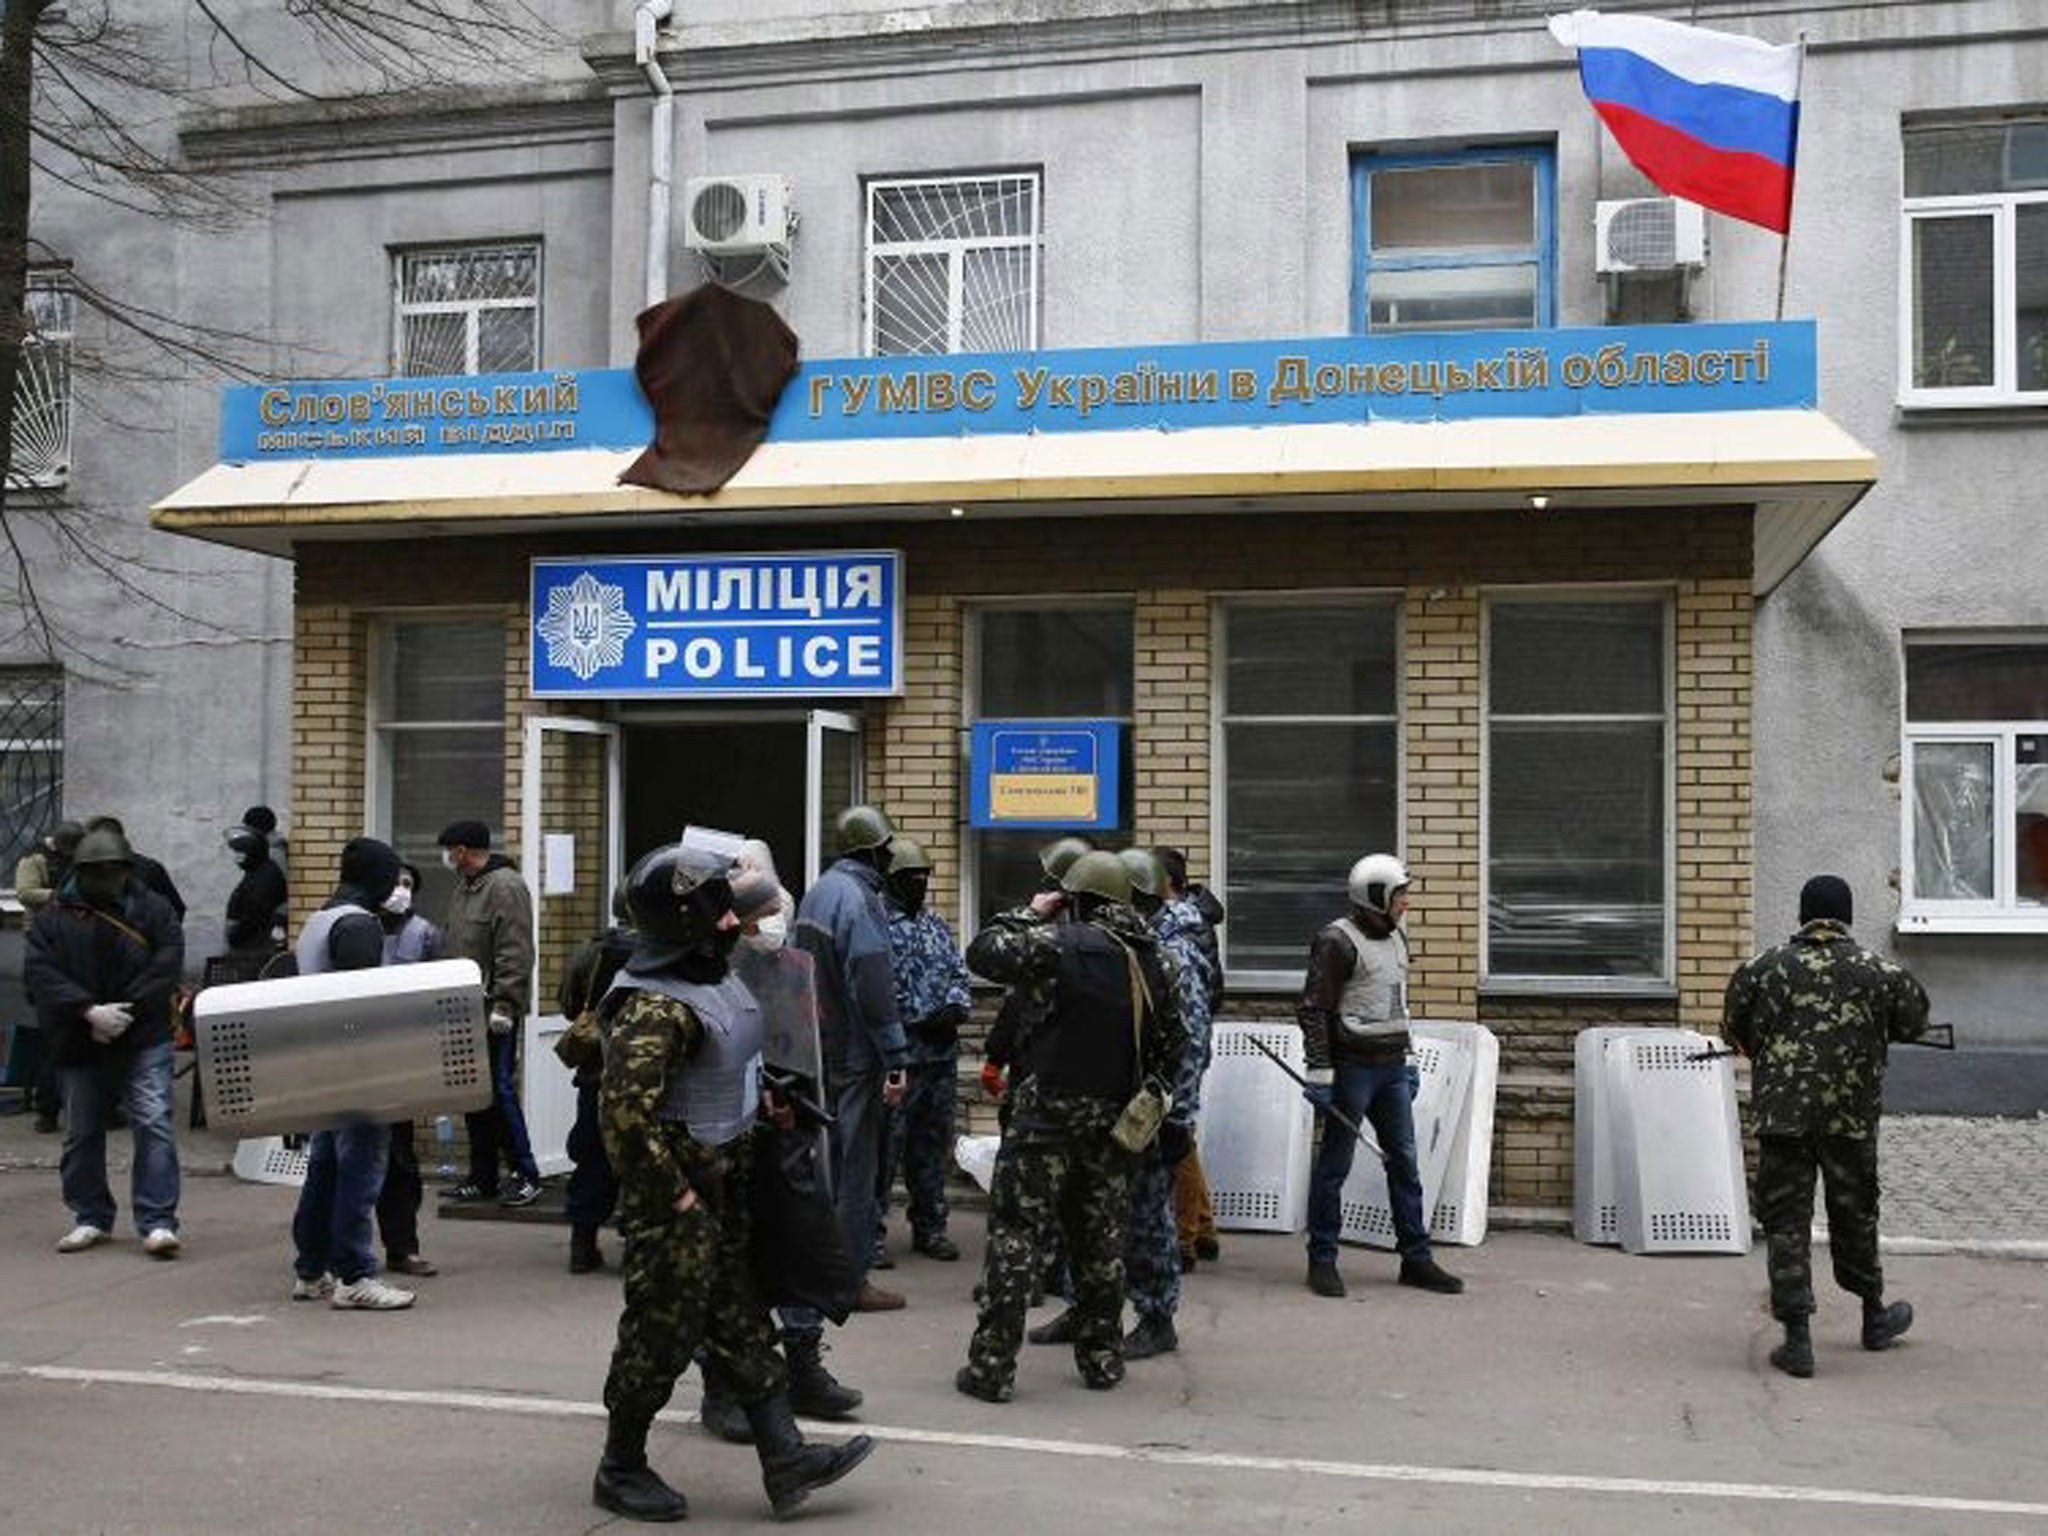 Armed men stand in front of the police headquarters building in Slaviansk, 12 April, 2014.